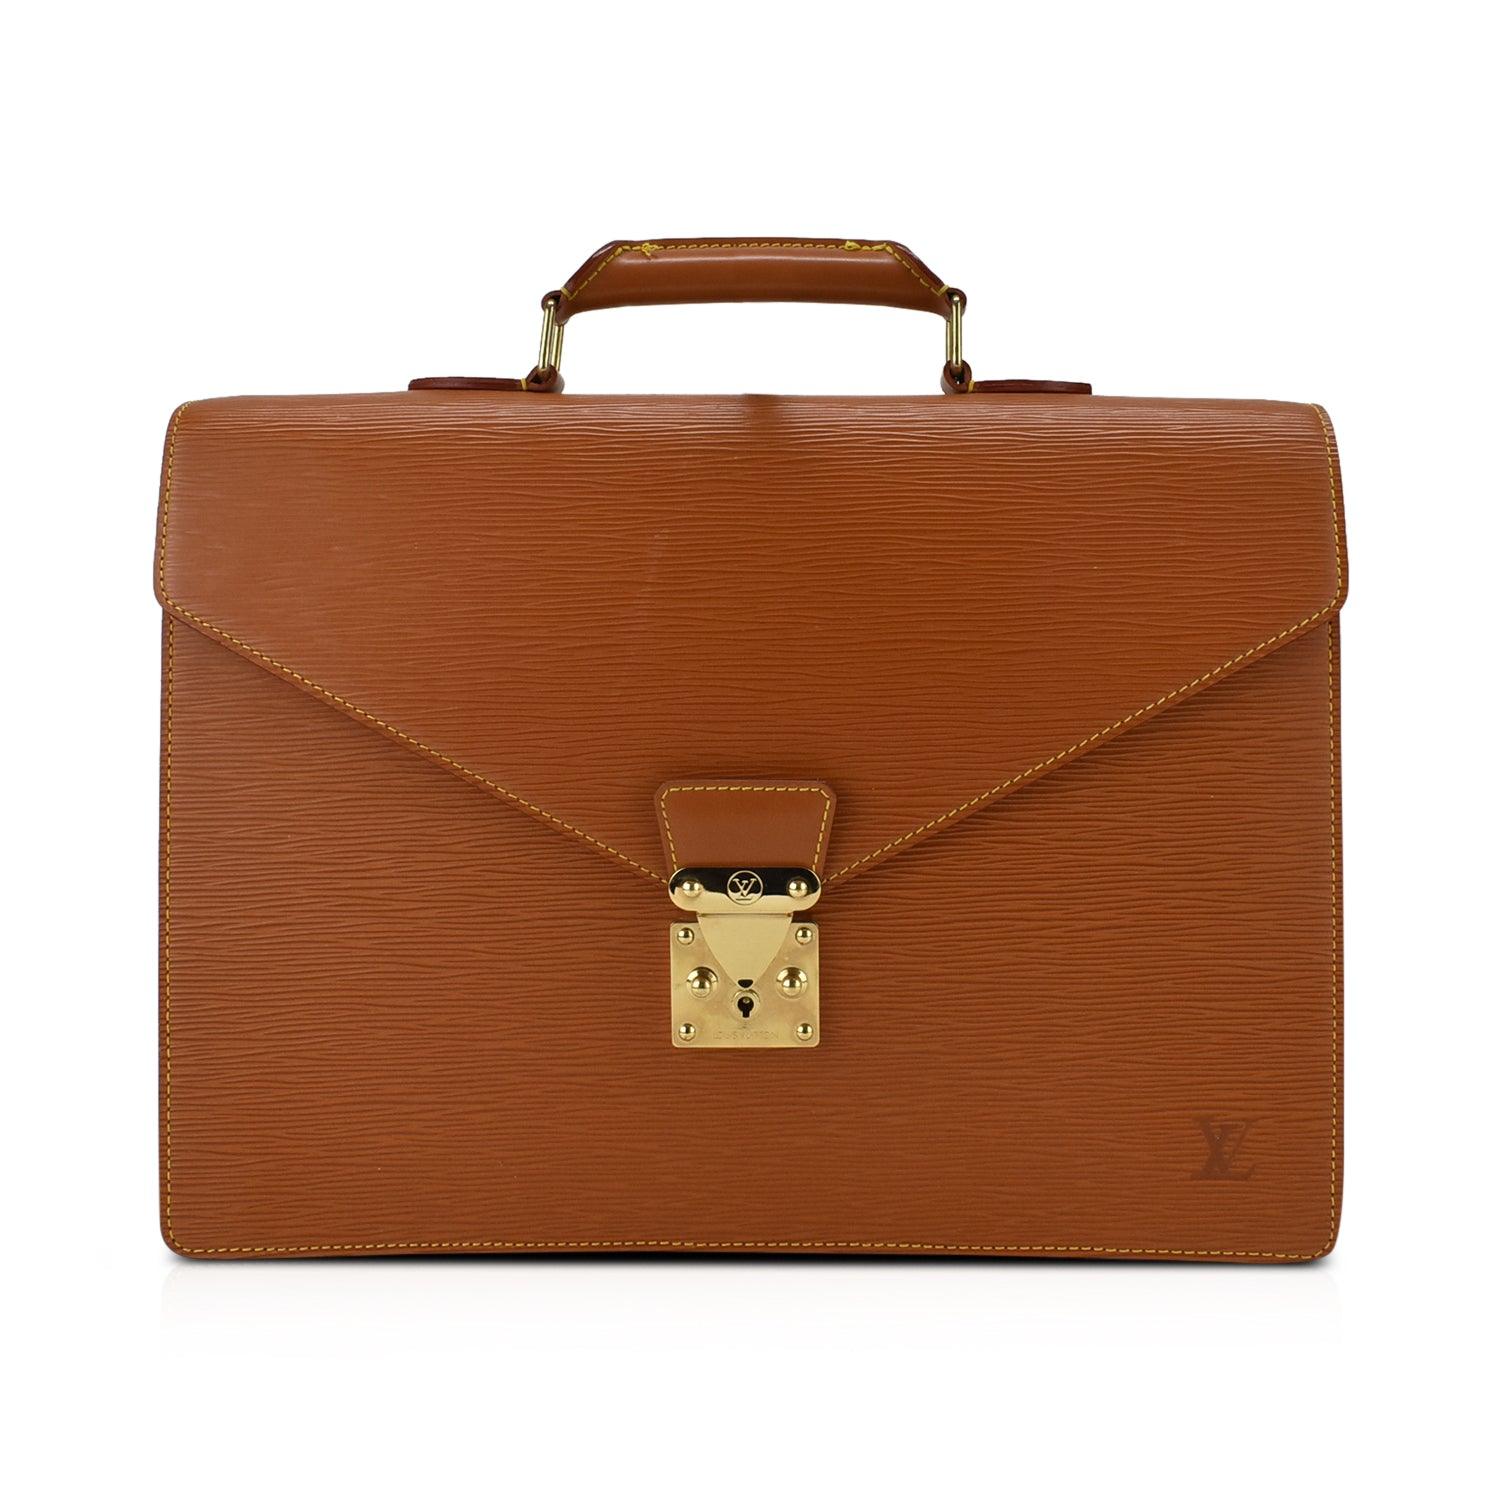 Louis Vuitton Briefcase - Fashionably Yours